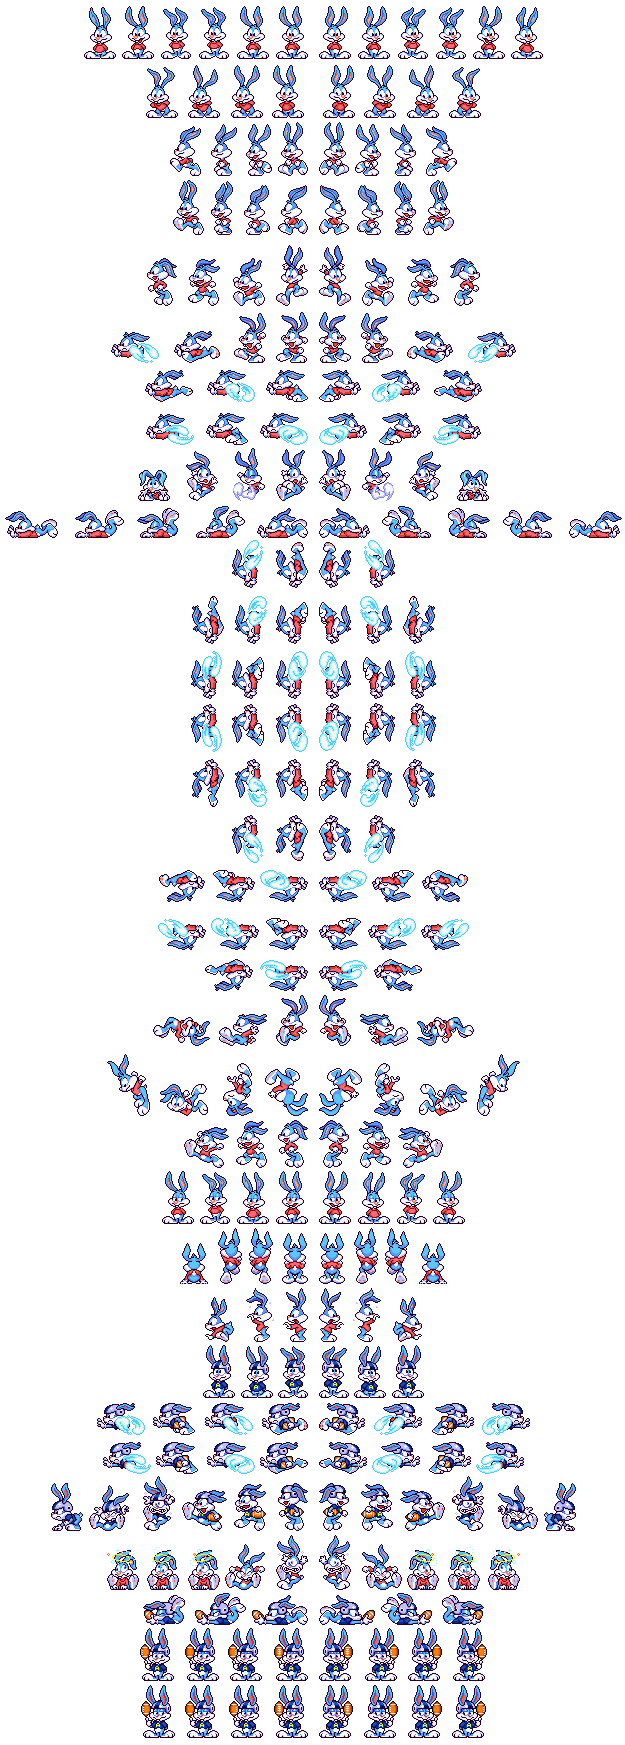 Sprite of Buster Bunny